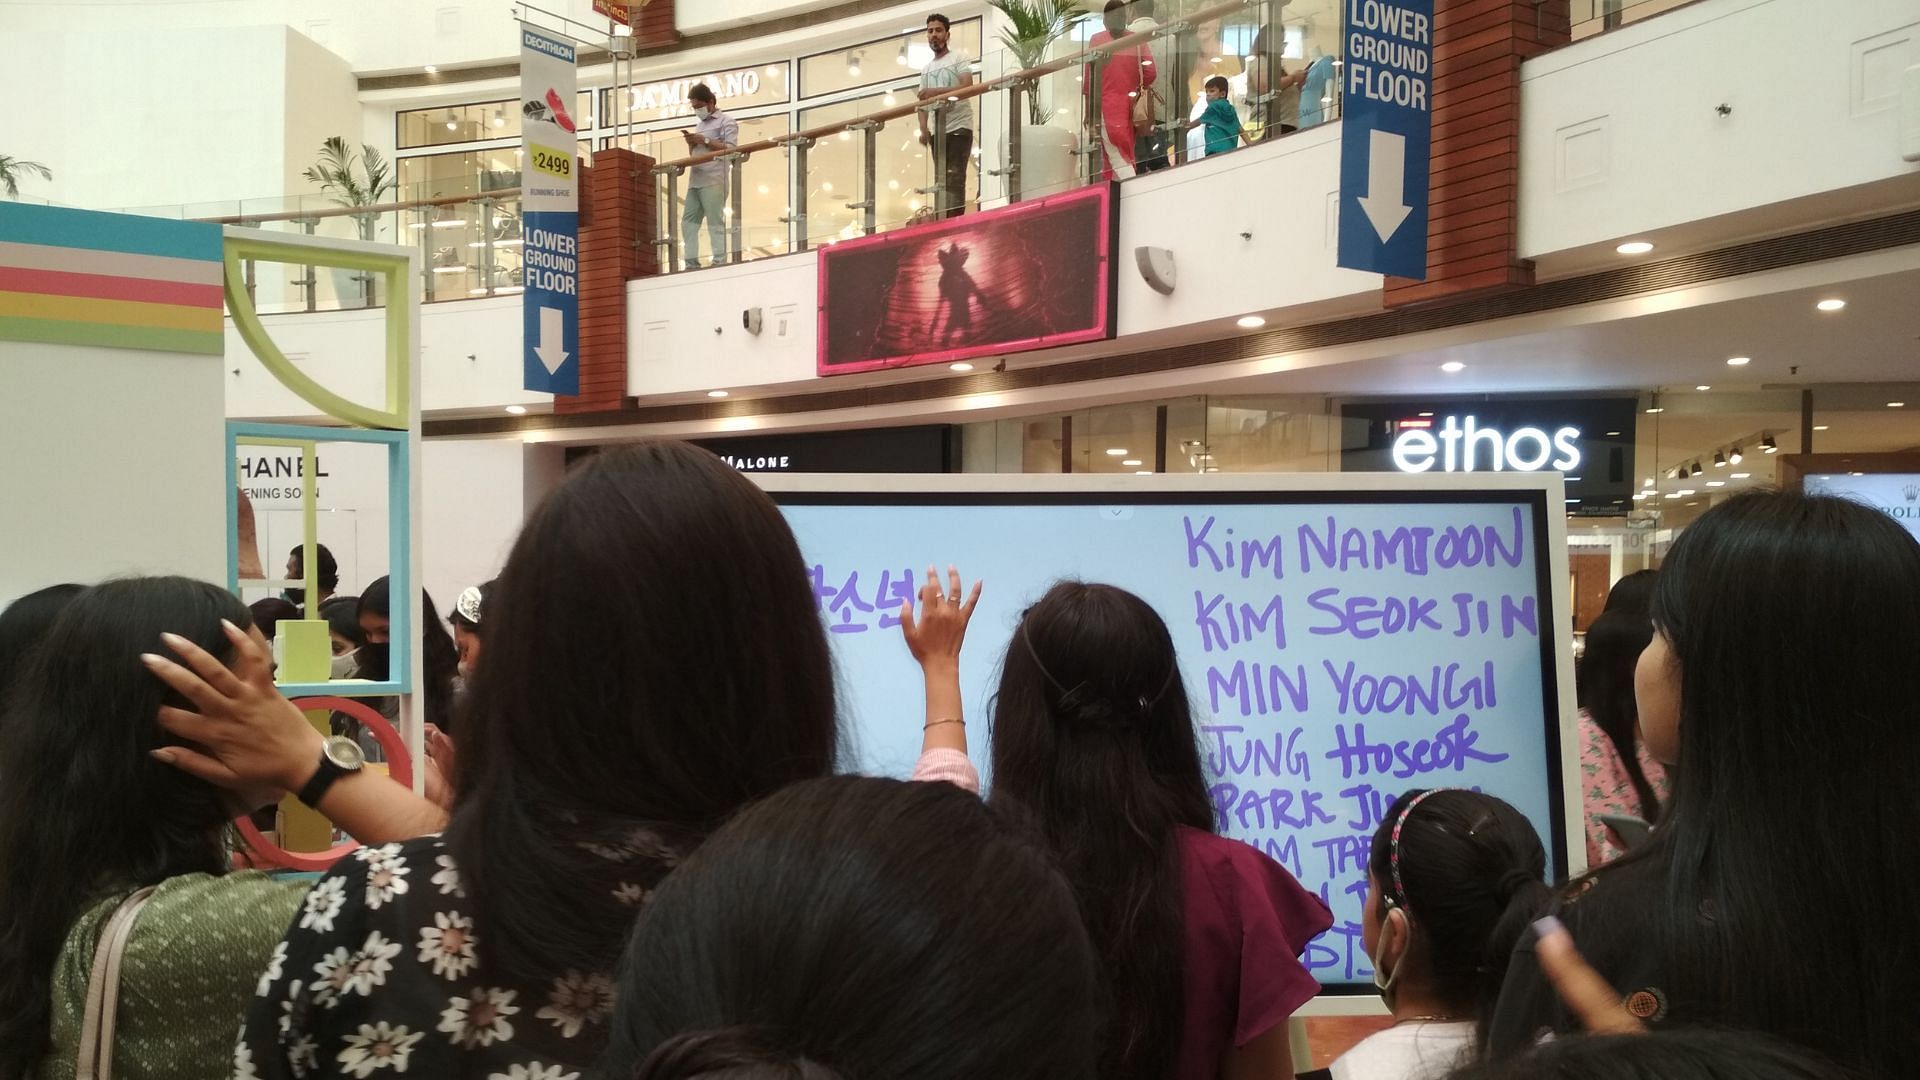 Fans participating in an art event by writing their bias name at Korea Fair in India (Image via Sportskeeda)